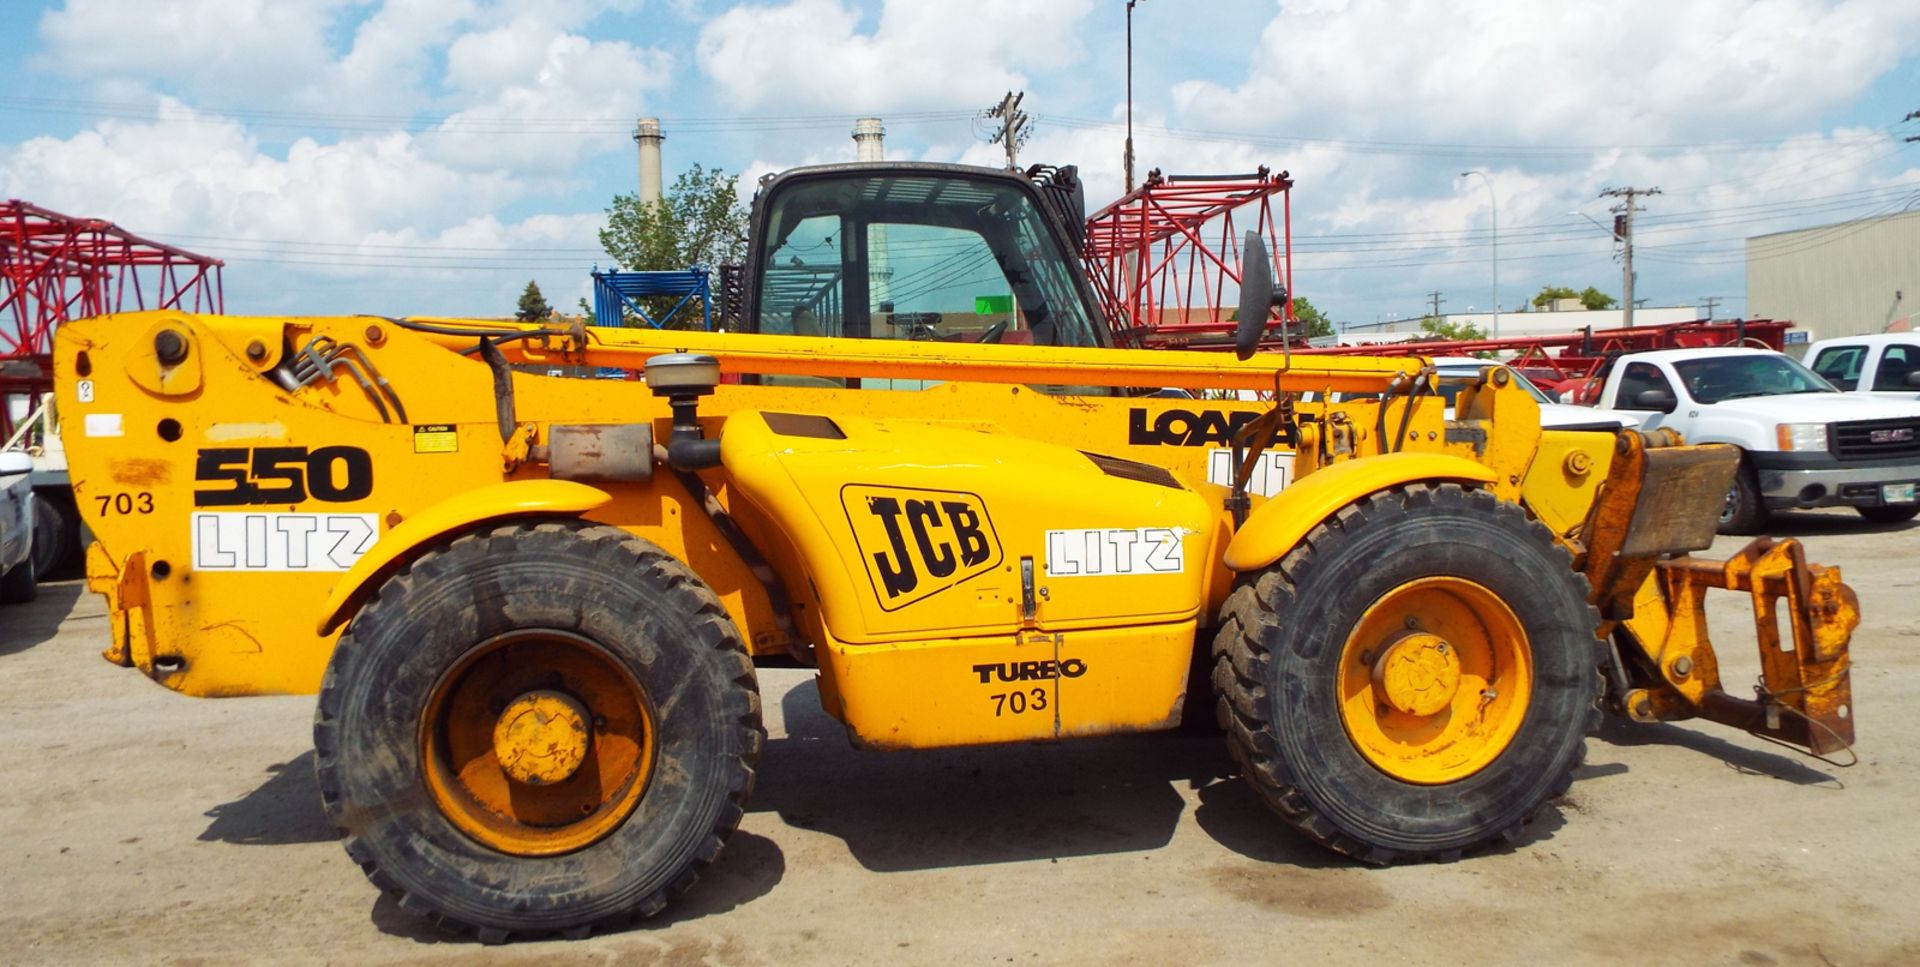 JCB (2001) 550 EXTEND-A-BOOM FORKLIFT, 10,000 LB CAPACITY, 17.5-25 TIRES, 3-STAGE BOOM, FRONT - Image 5 of 6